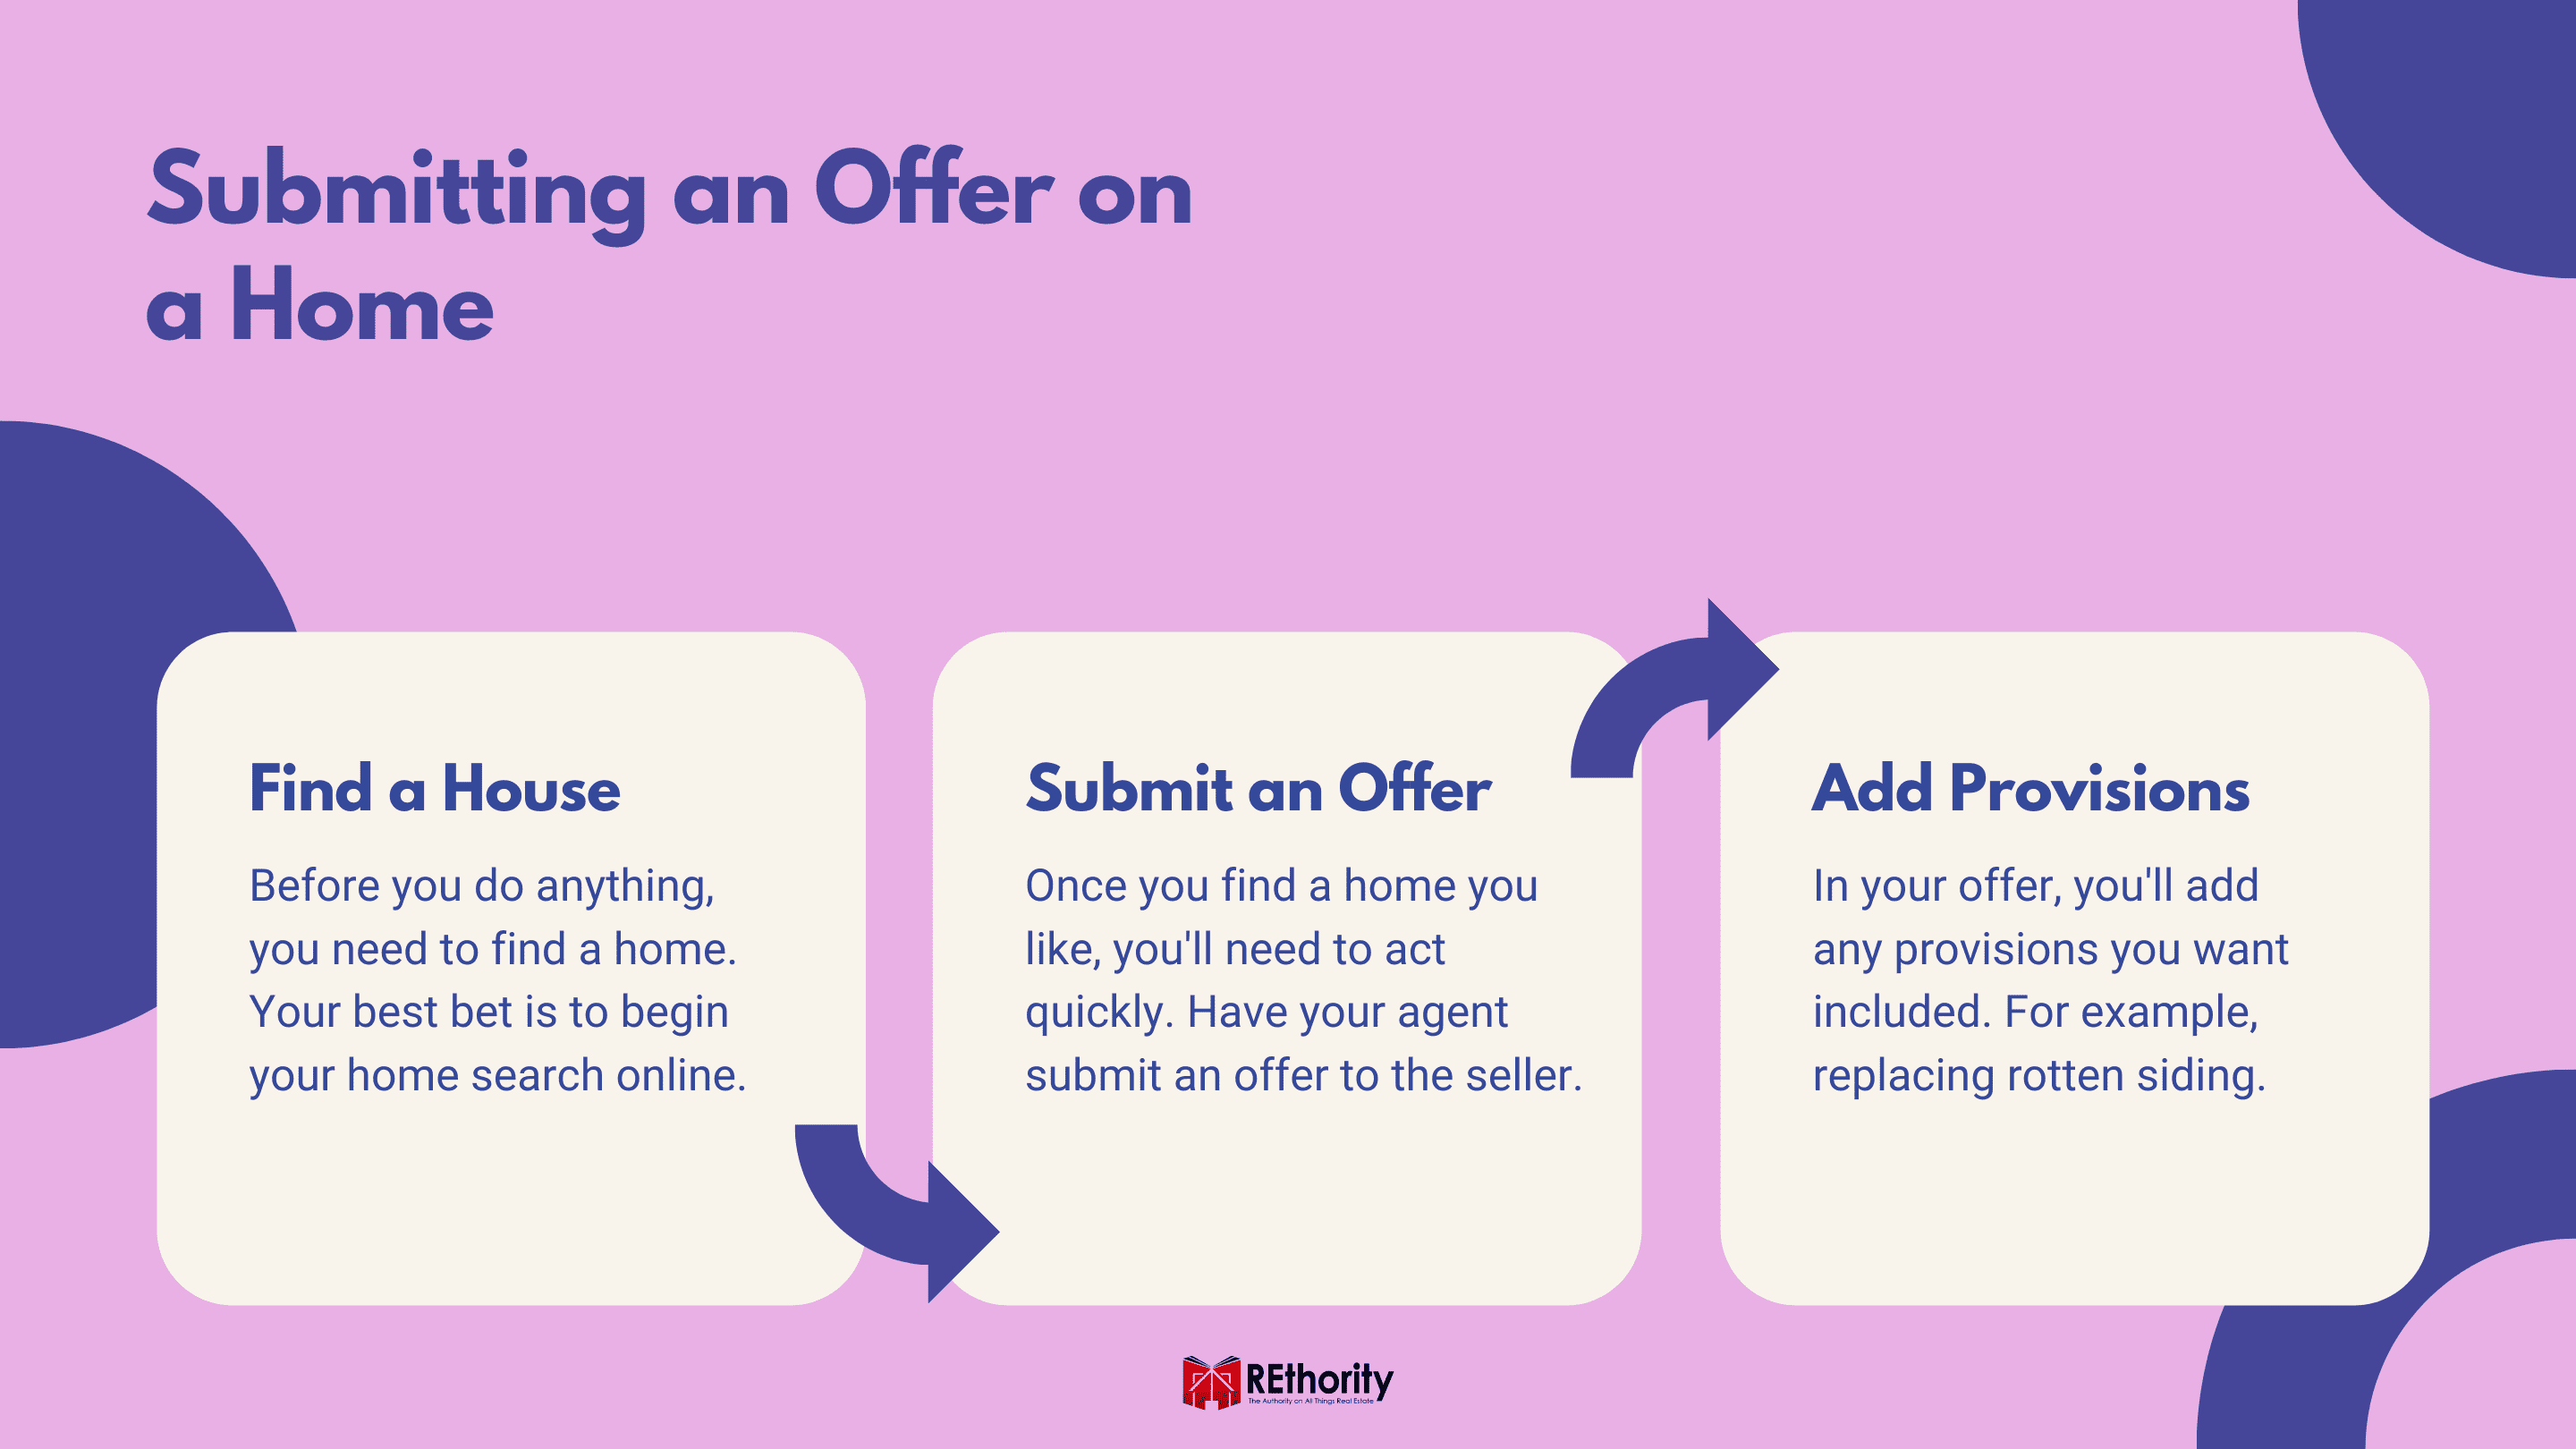 Submitting an Offer on a Home